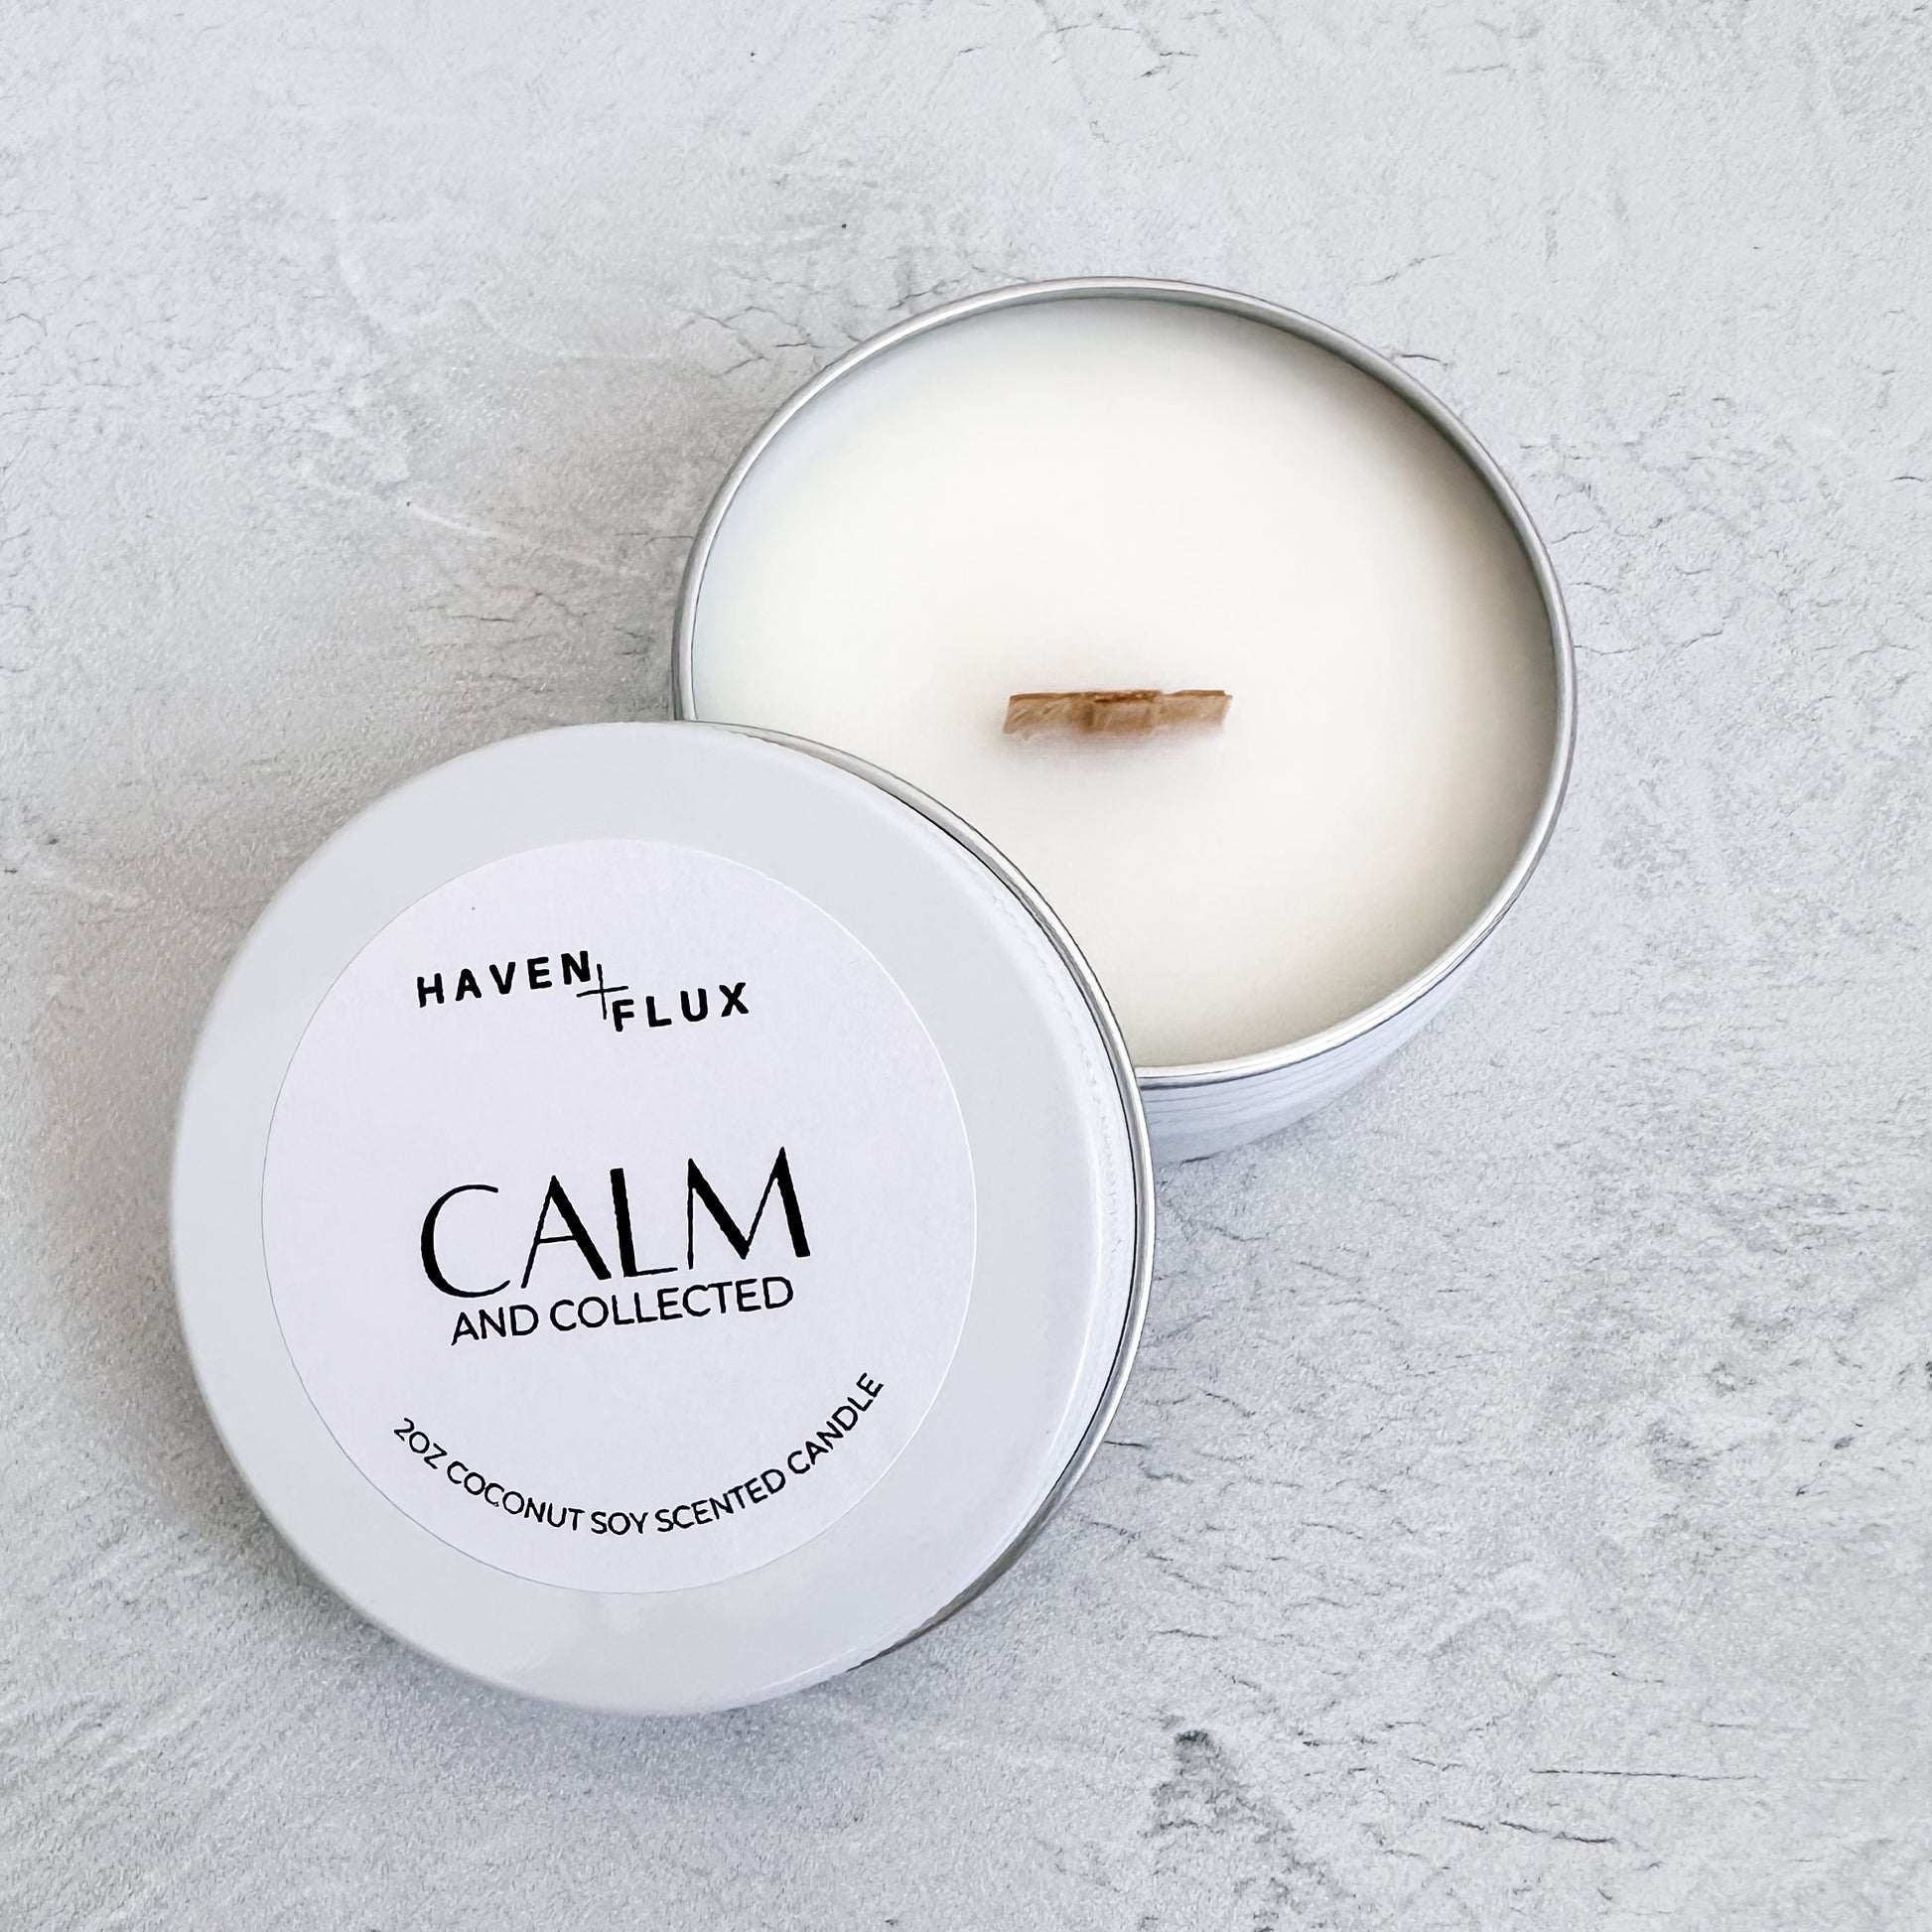 Calm and Collected Non-Toxic Coconut Soy Wax Wooden Wick Intention 2oz Sample Candle for Mental Health